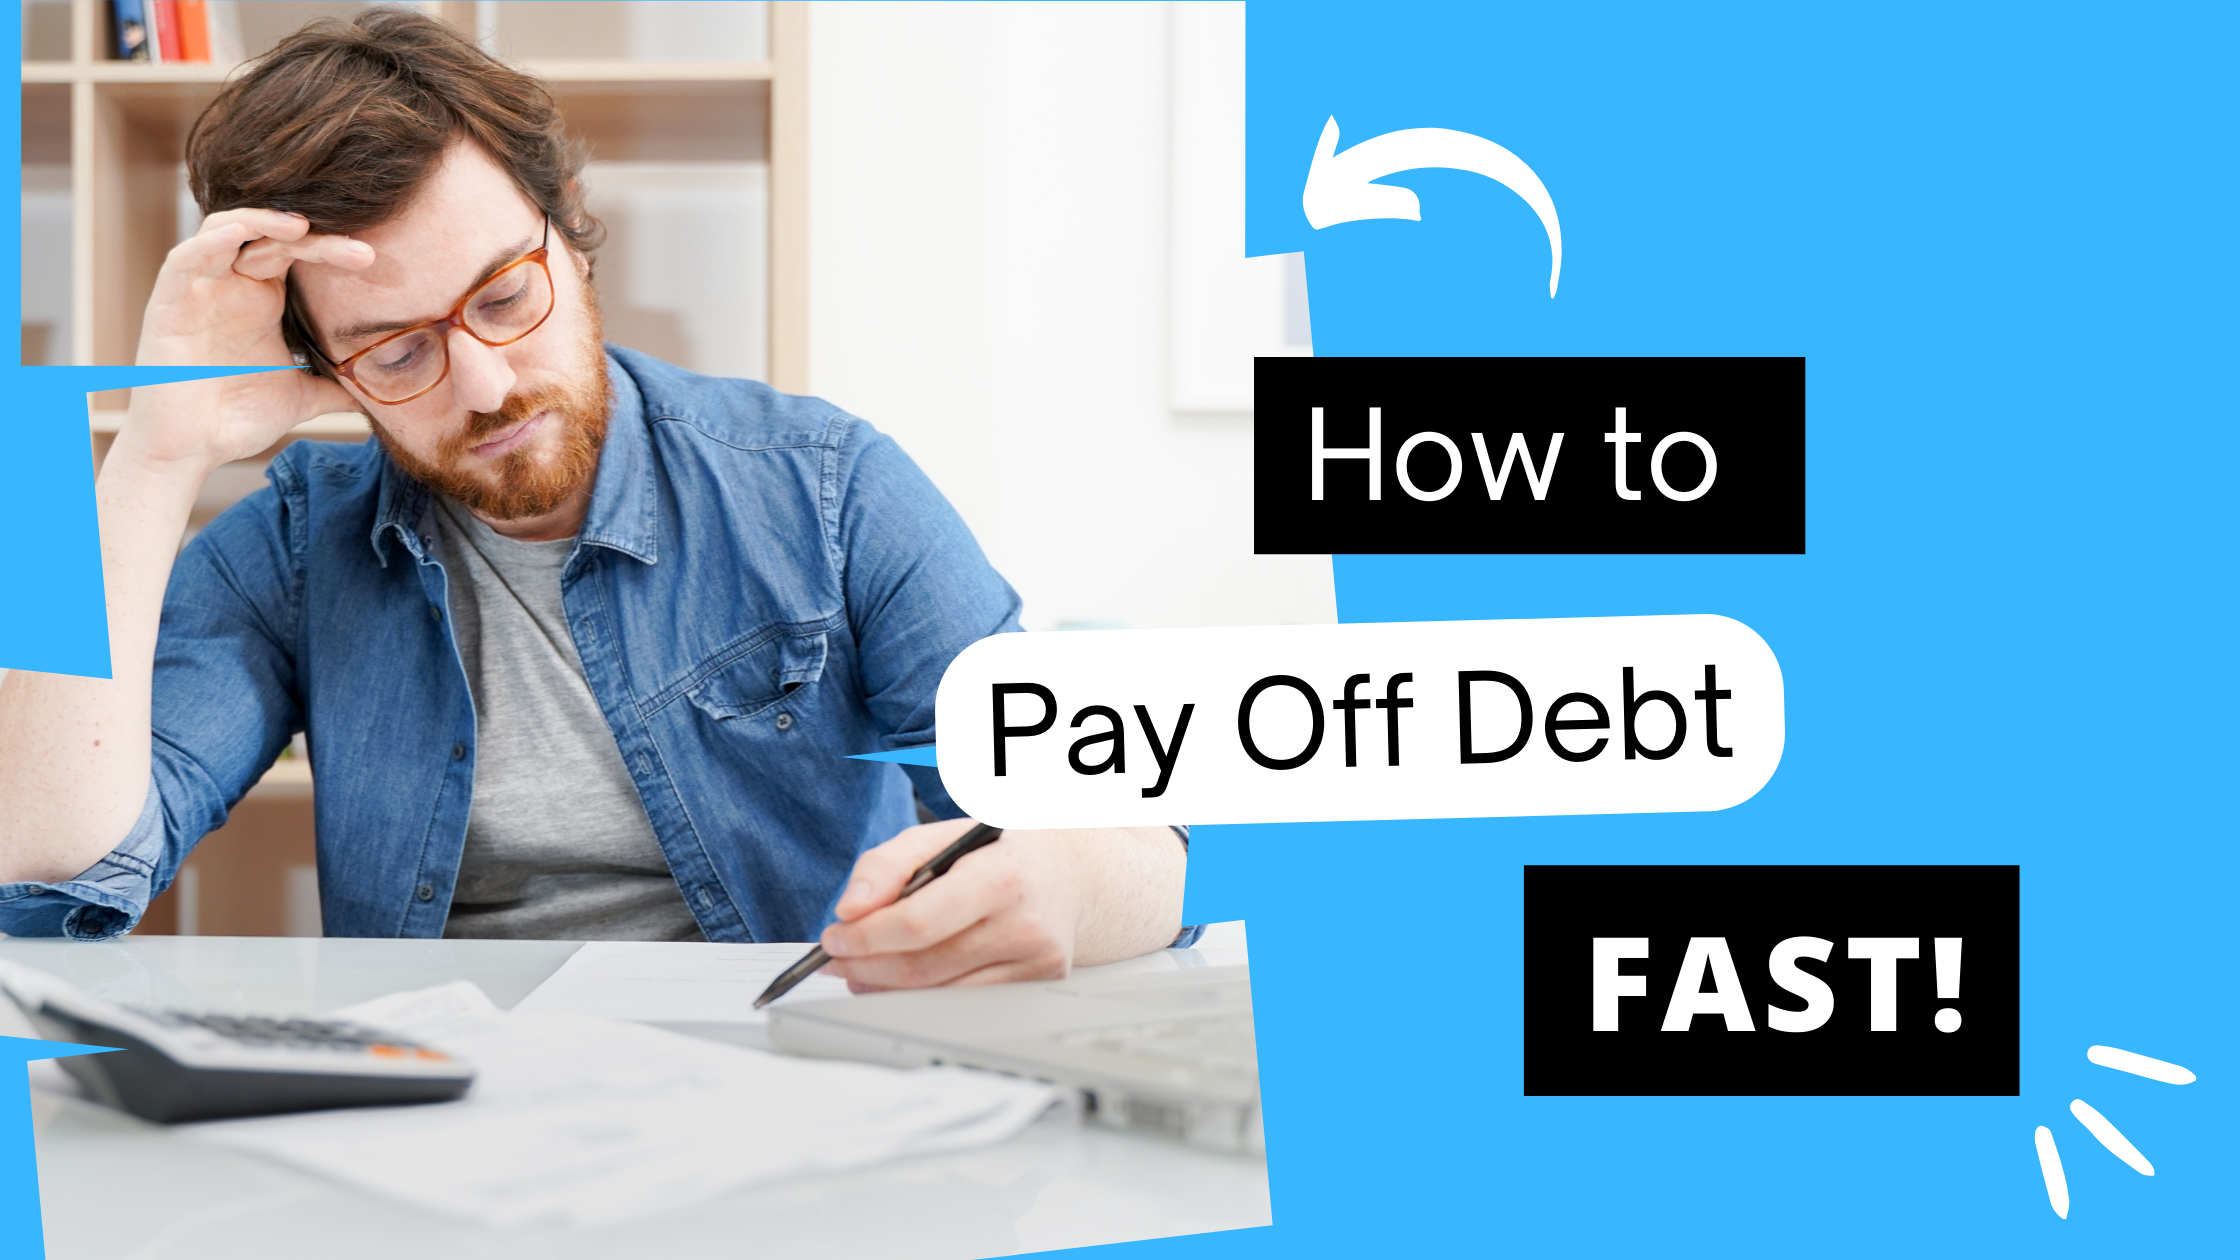 How to Pay off debt fast